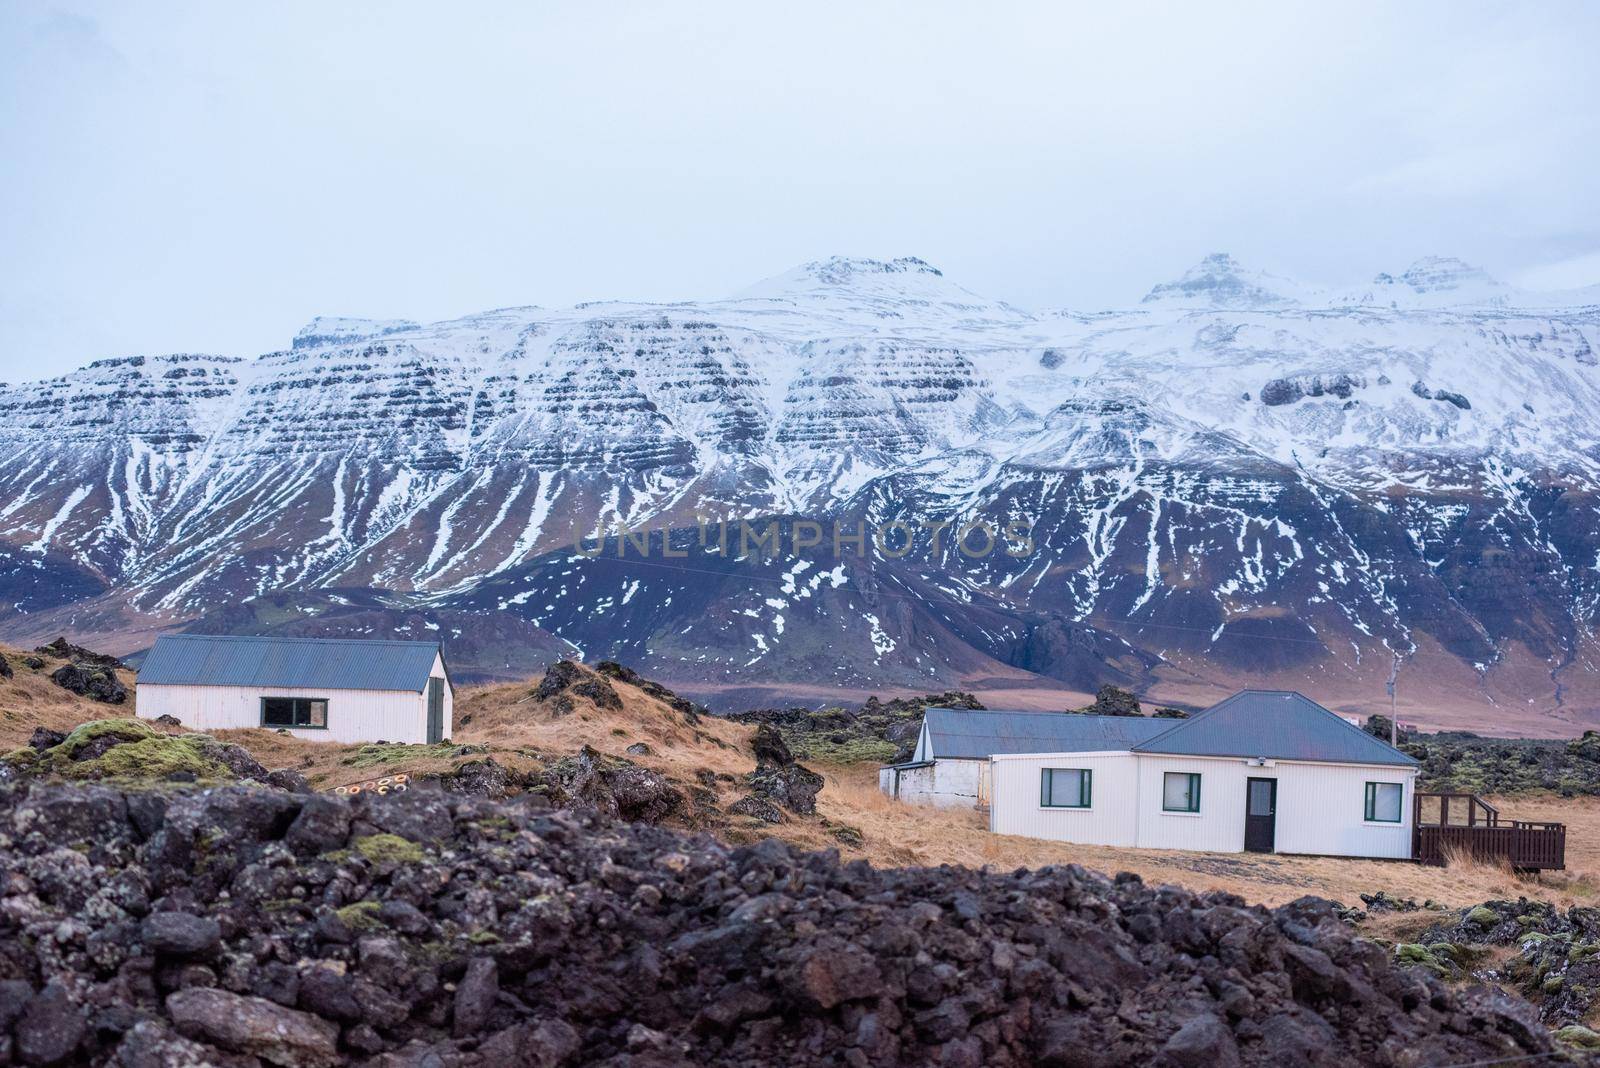 Landscape with Icelandic homes sitting in front of gorgeous snow capped mountains with layers of snow and dark rock. by jyurinko